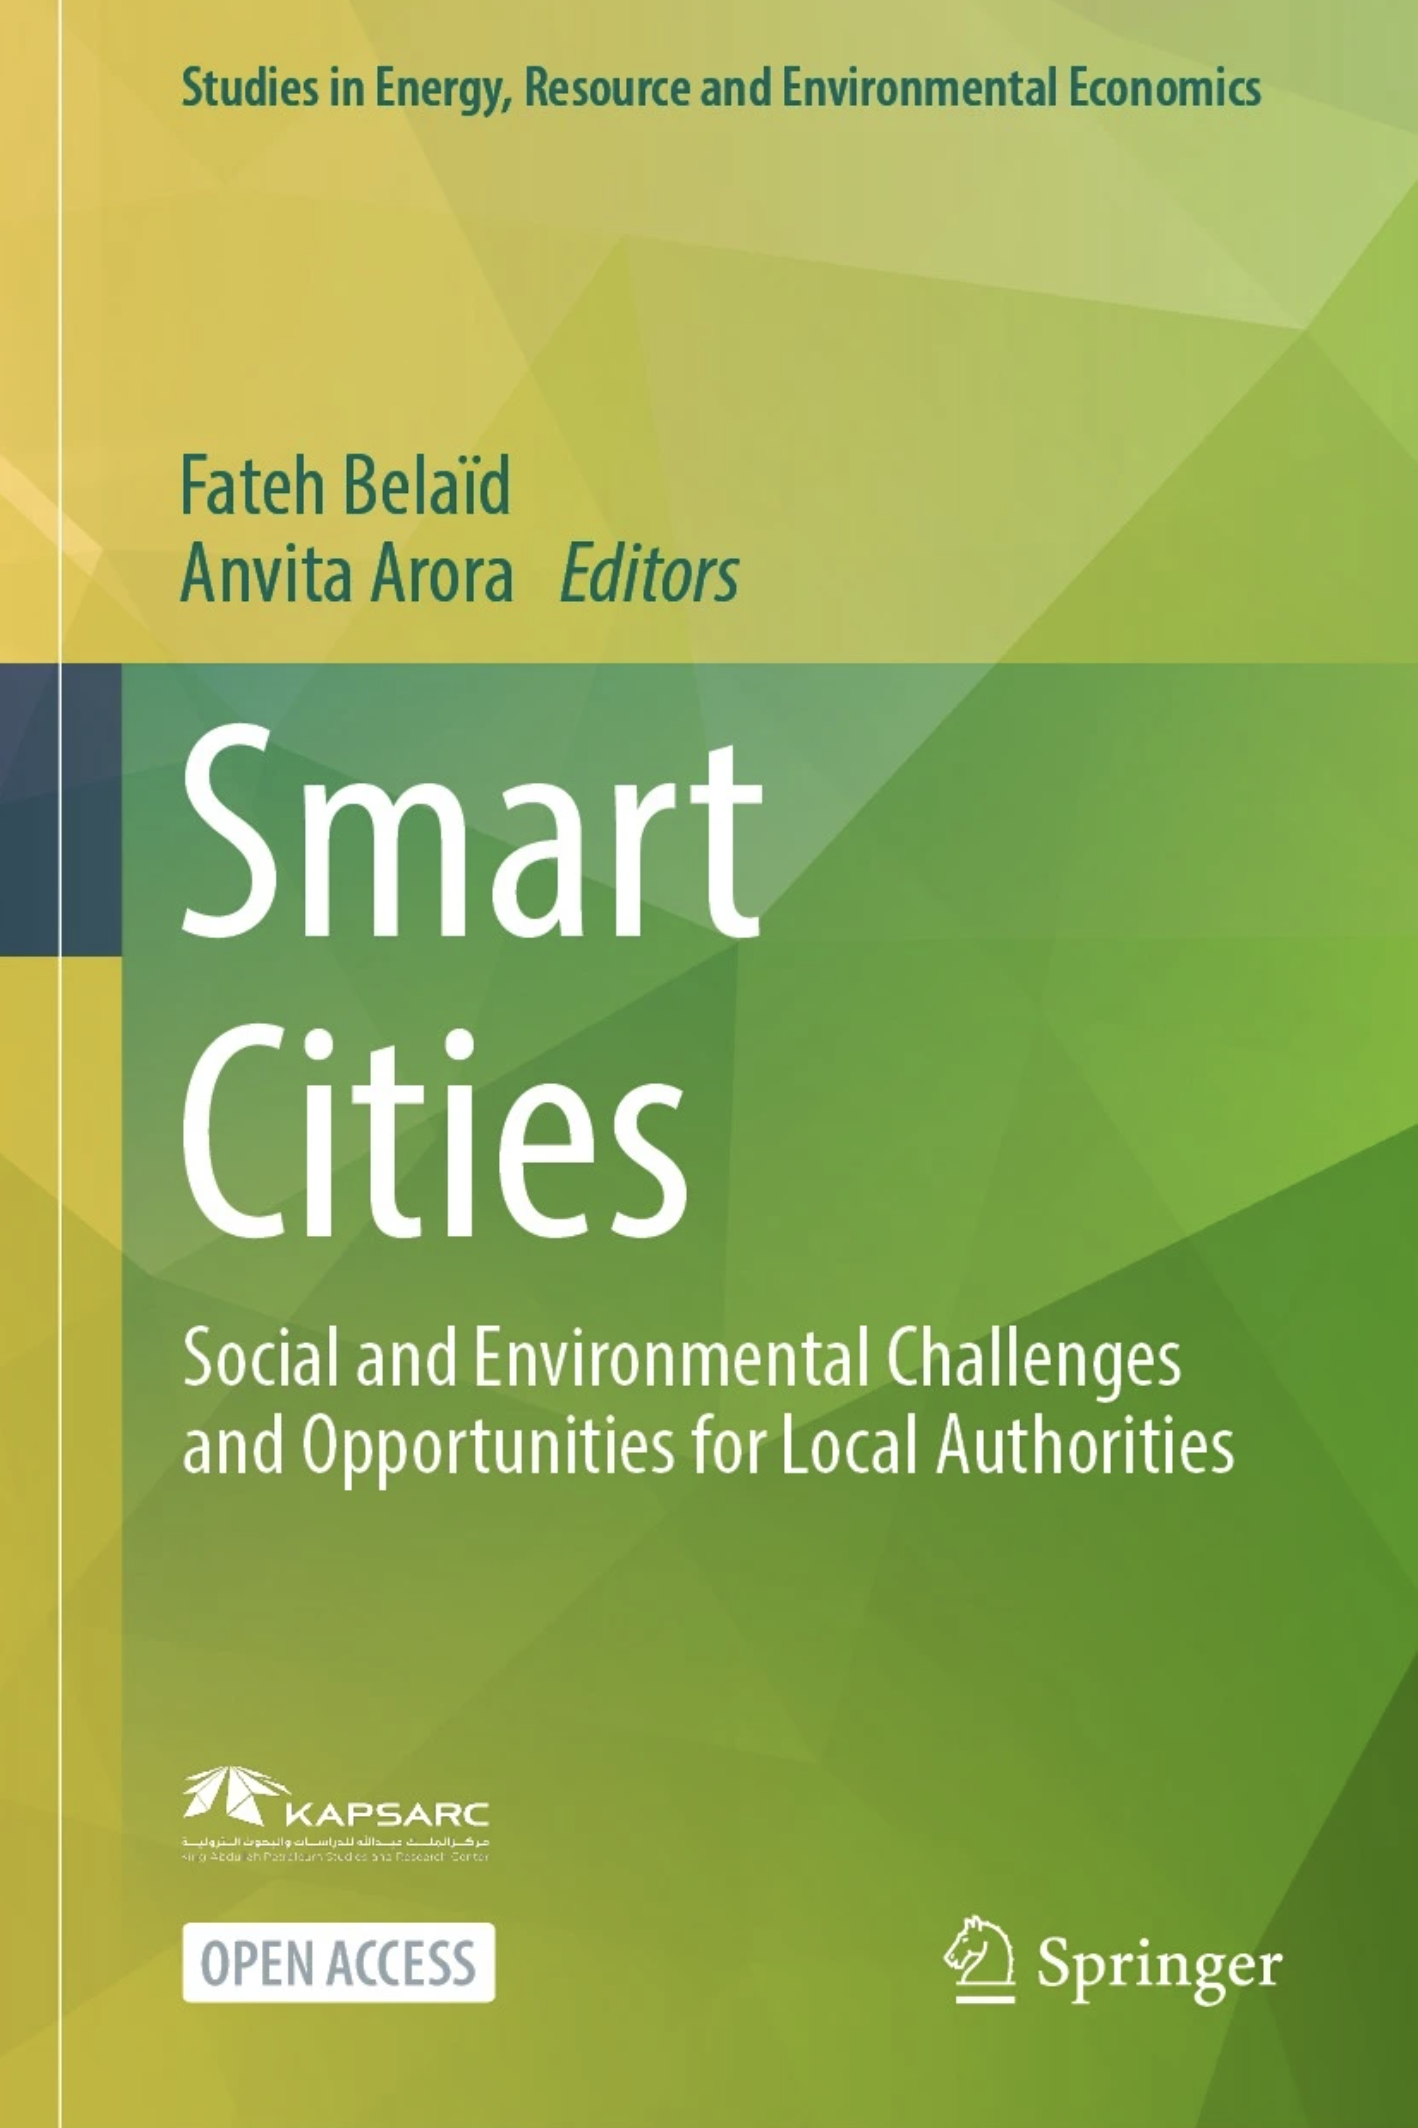 Smart Transportation Systems in Smart Cities: Practices, Challenges, and Opportunities for Saudi Cities